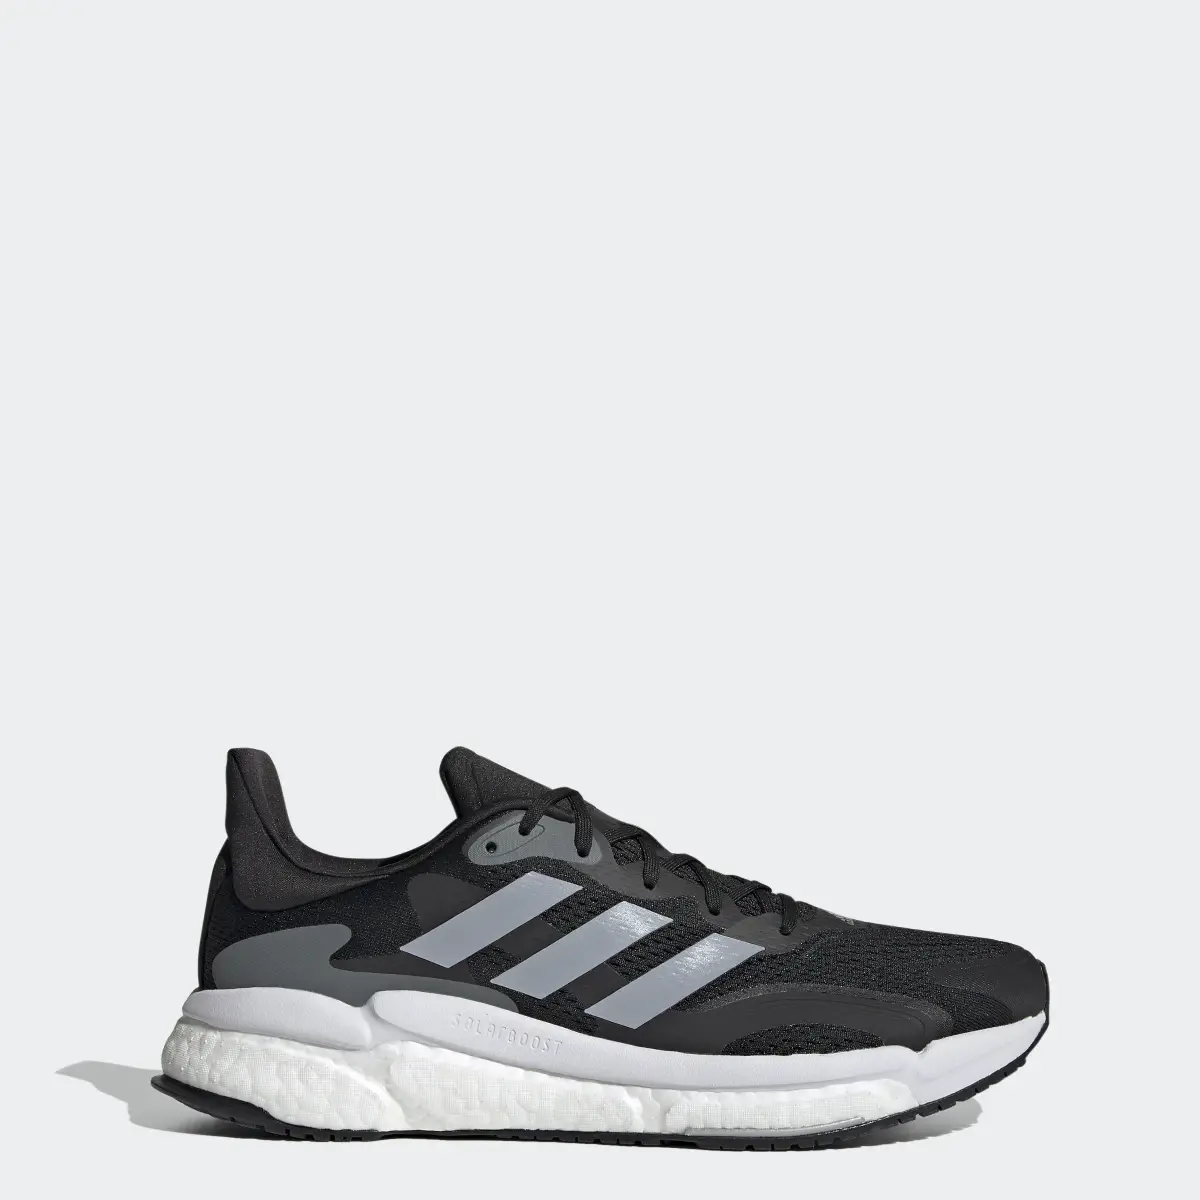 Adidas SolarBoost 3 Shoes. 1